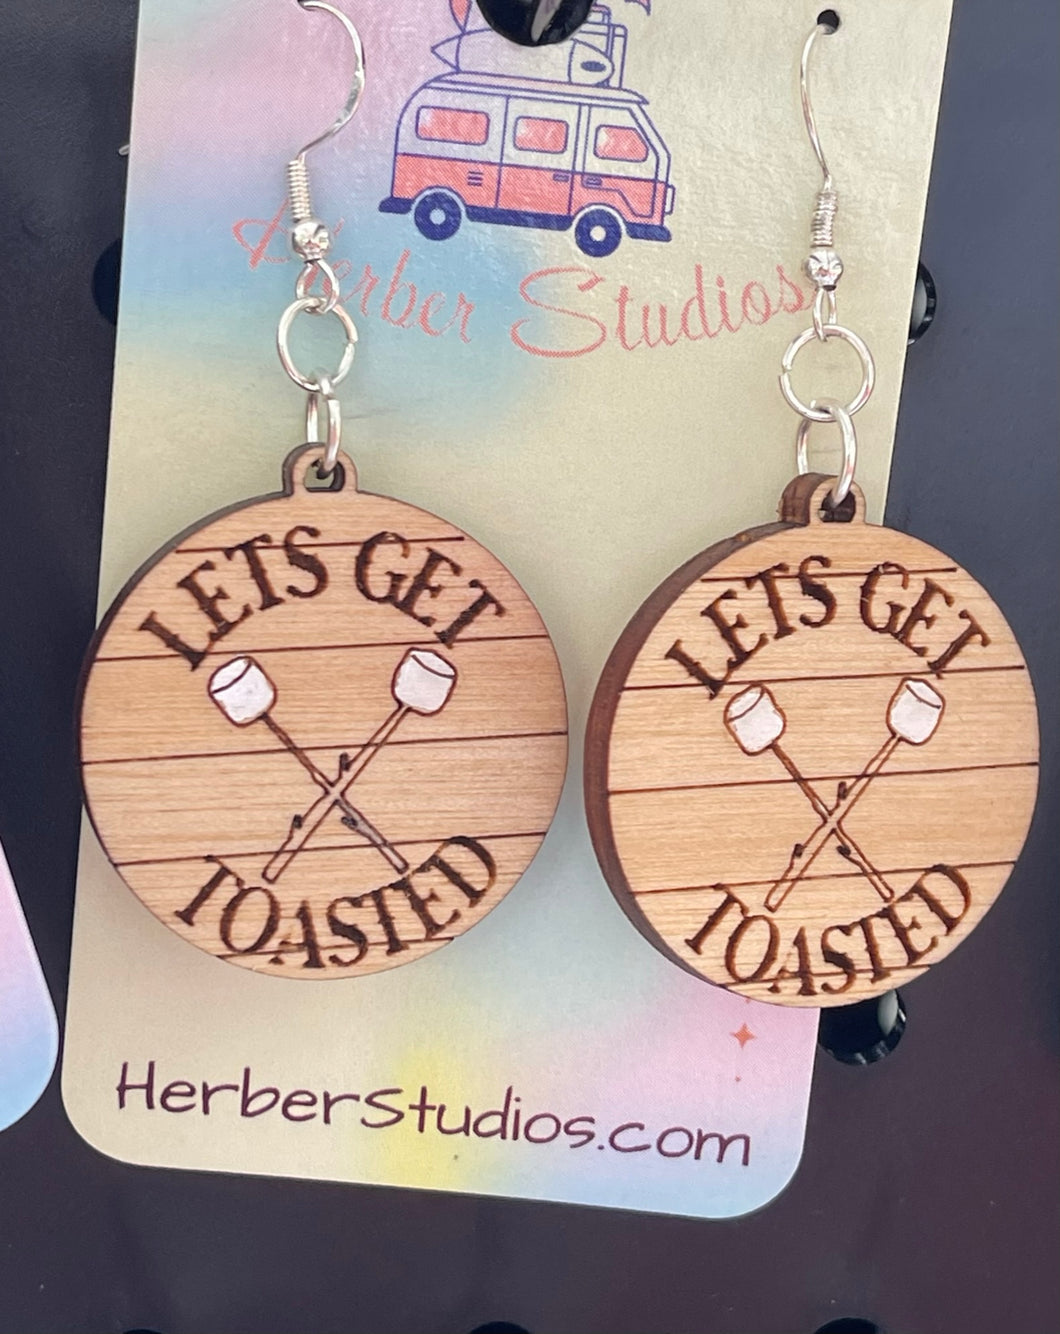 Let's Get Toasted Marshmallow Campfire Drop Earrings